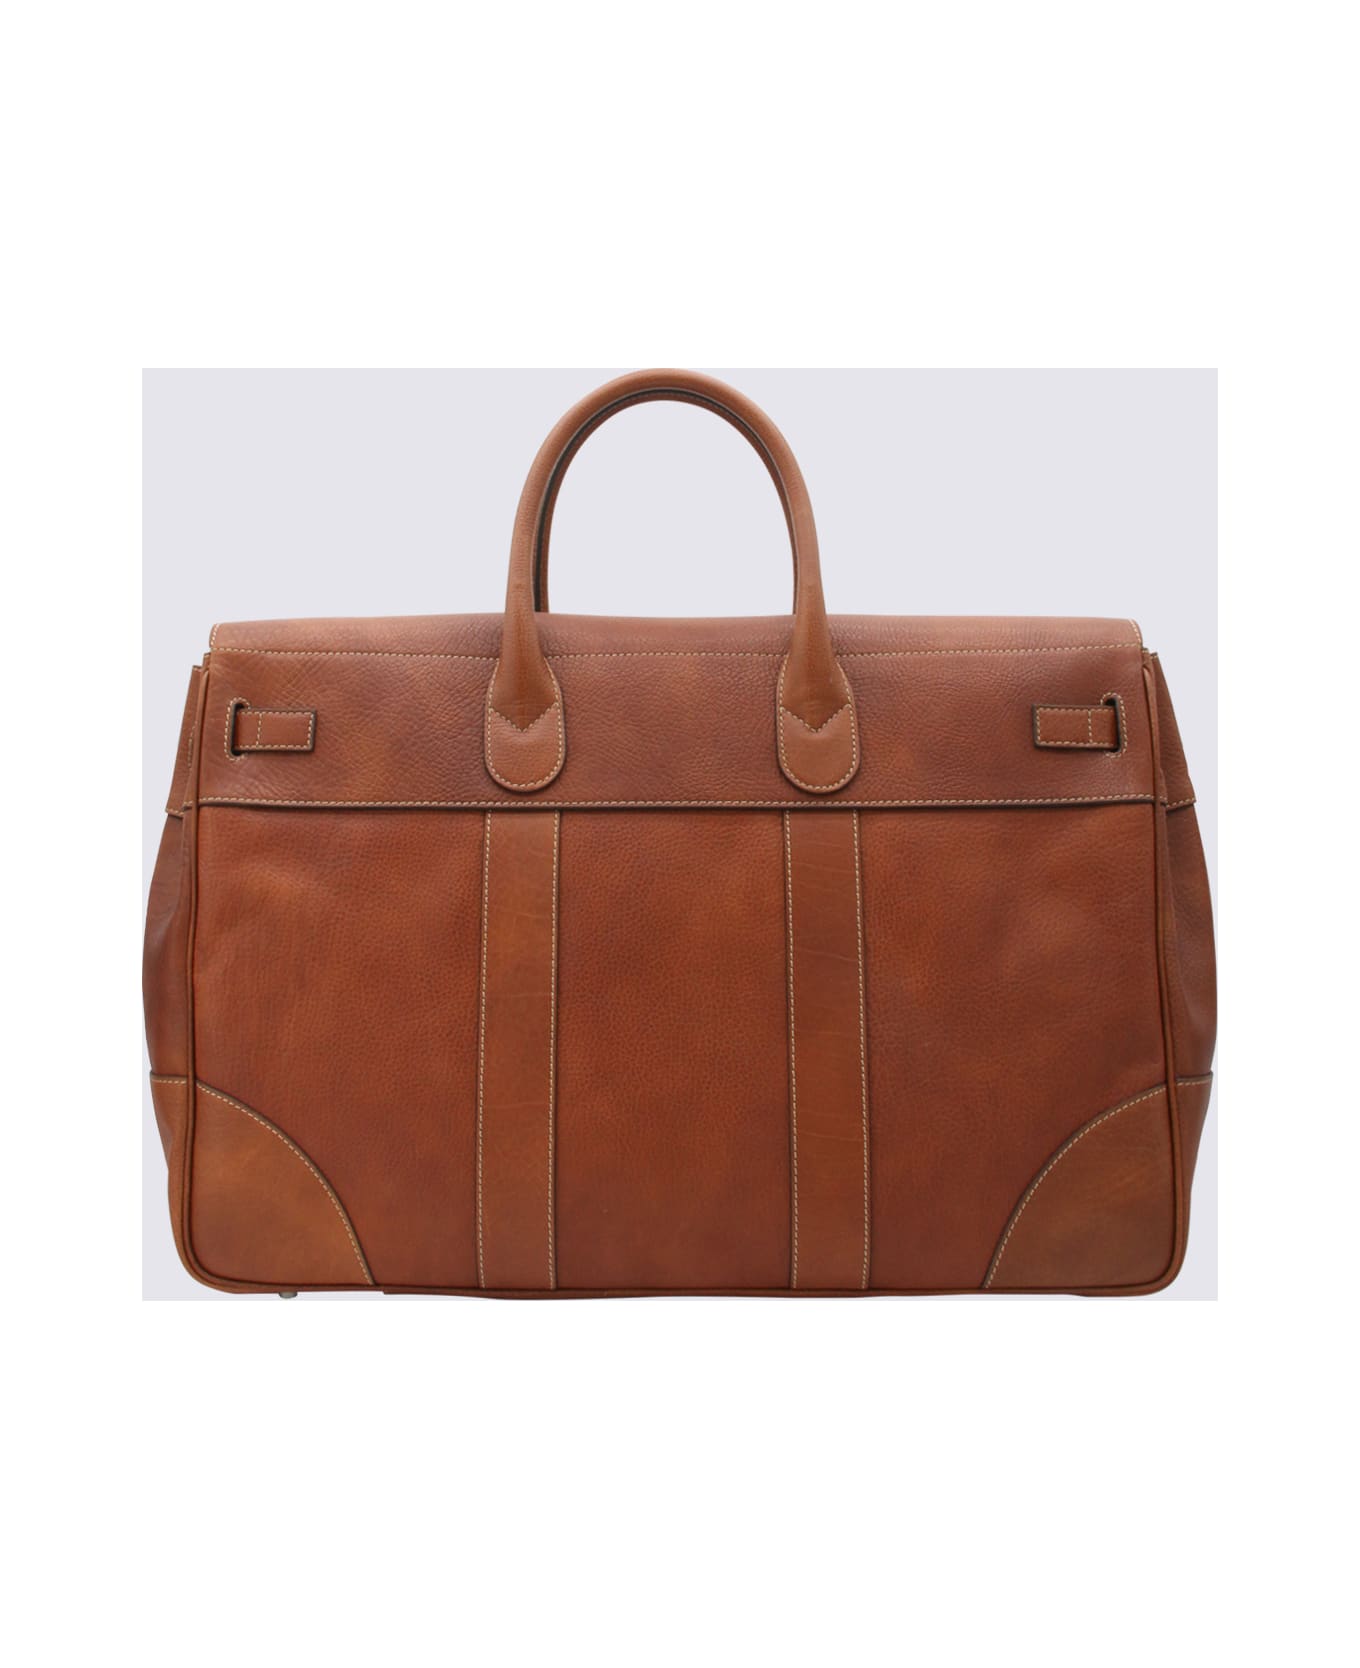 Brunello Cucinelli Brown Leather Weekender Country Bag タンクトップ